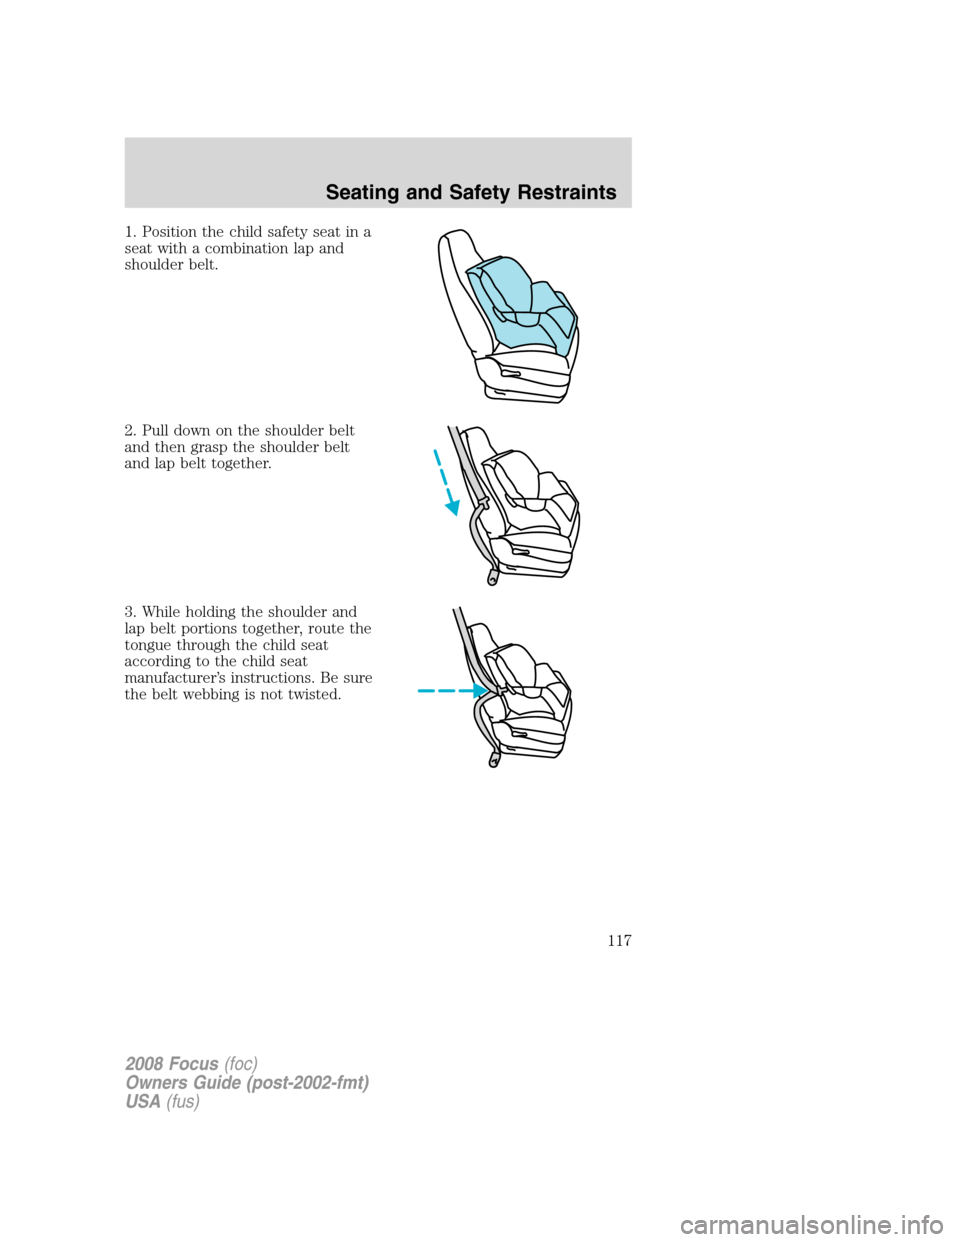 FORD FOCUS 2008 2.G Owners Guide 1. Position the child safety seat in a
seat with a combination lap and
shoulder belt.
2. Pull down on the shoulder belt
and then grasp the shoulder belt
and lap belt together.
3. While holding the sho